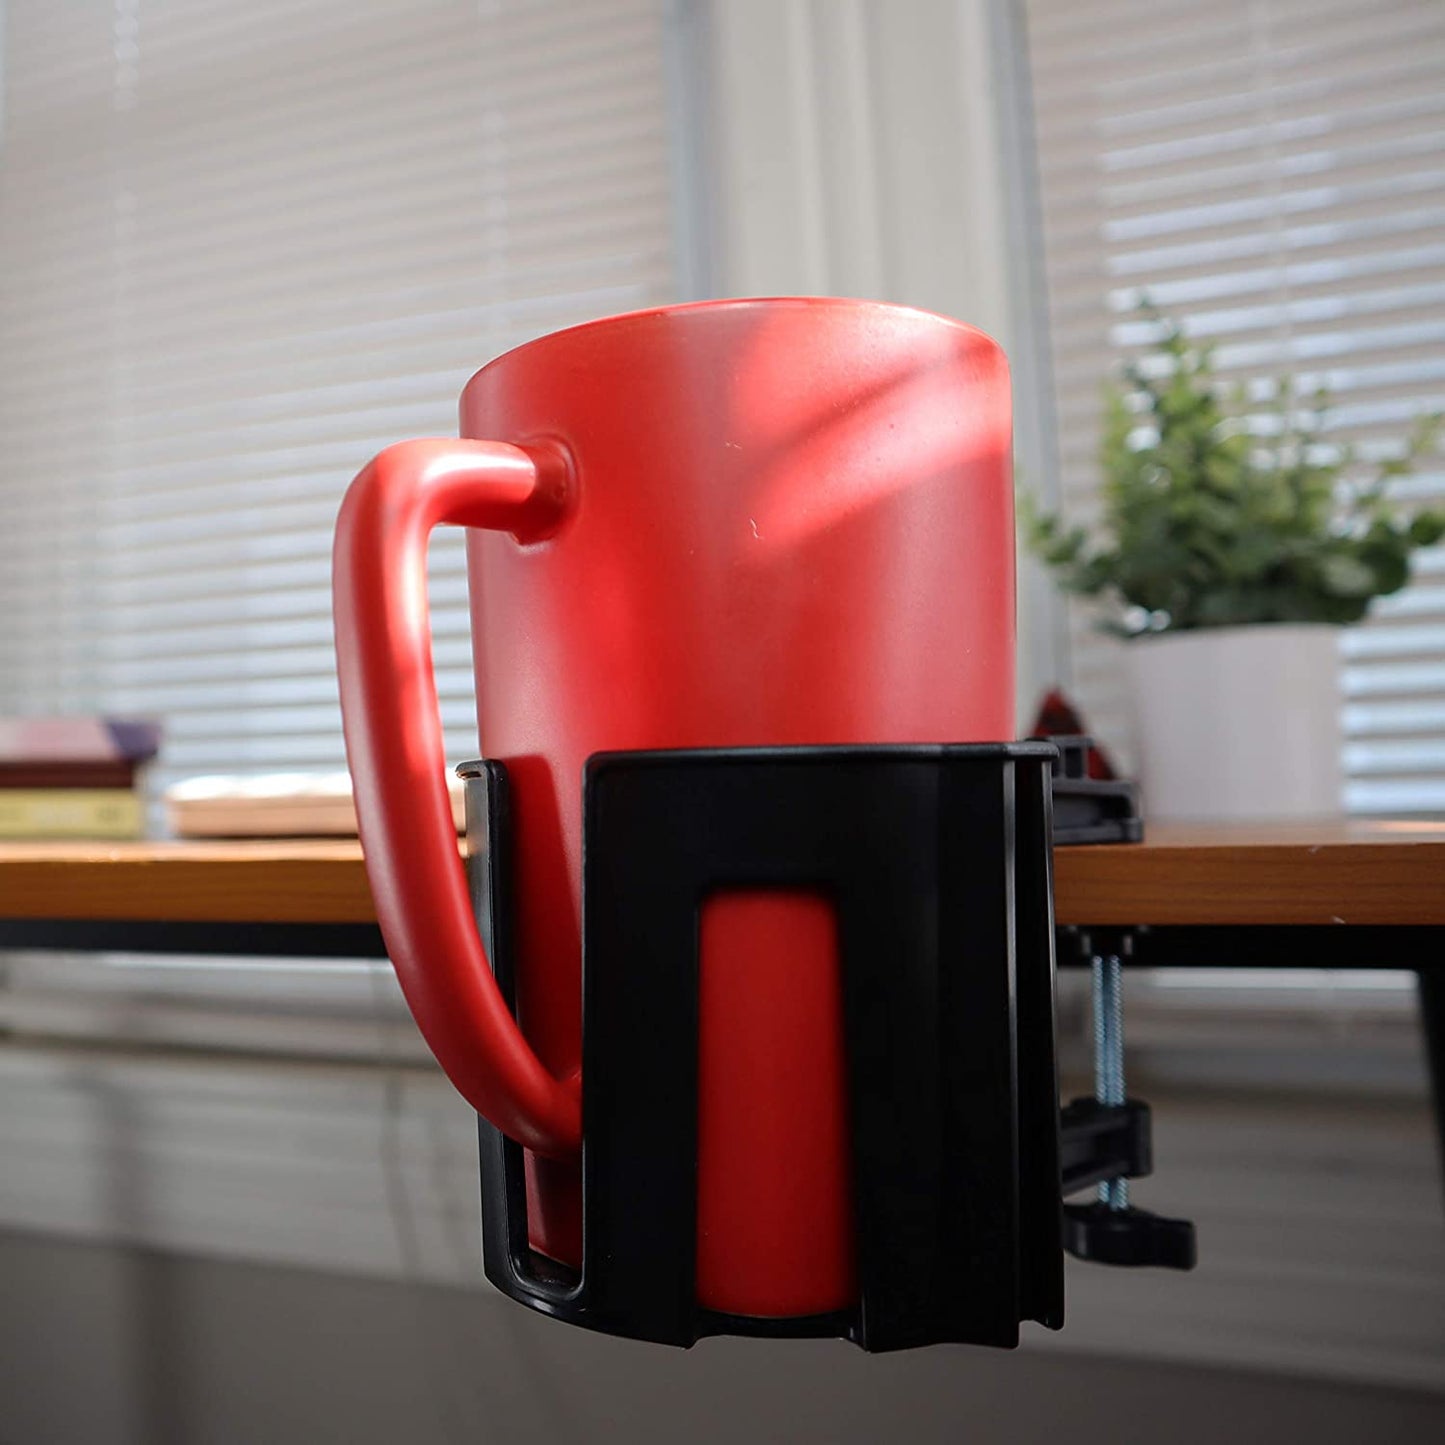 A cup holster which is attached to a desk via clamp. A red cup is securely resting in the holster.